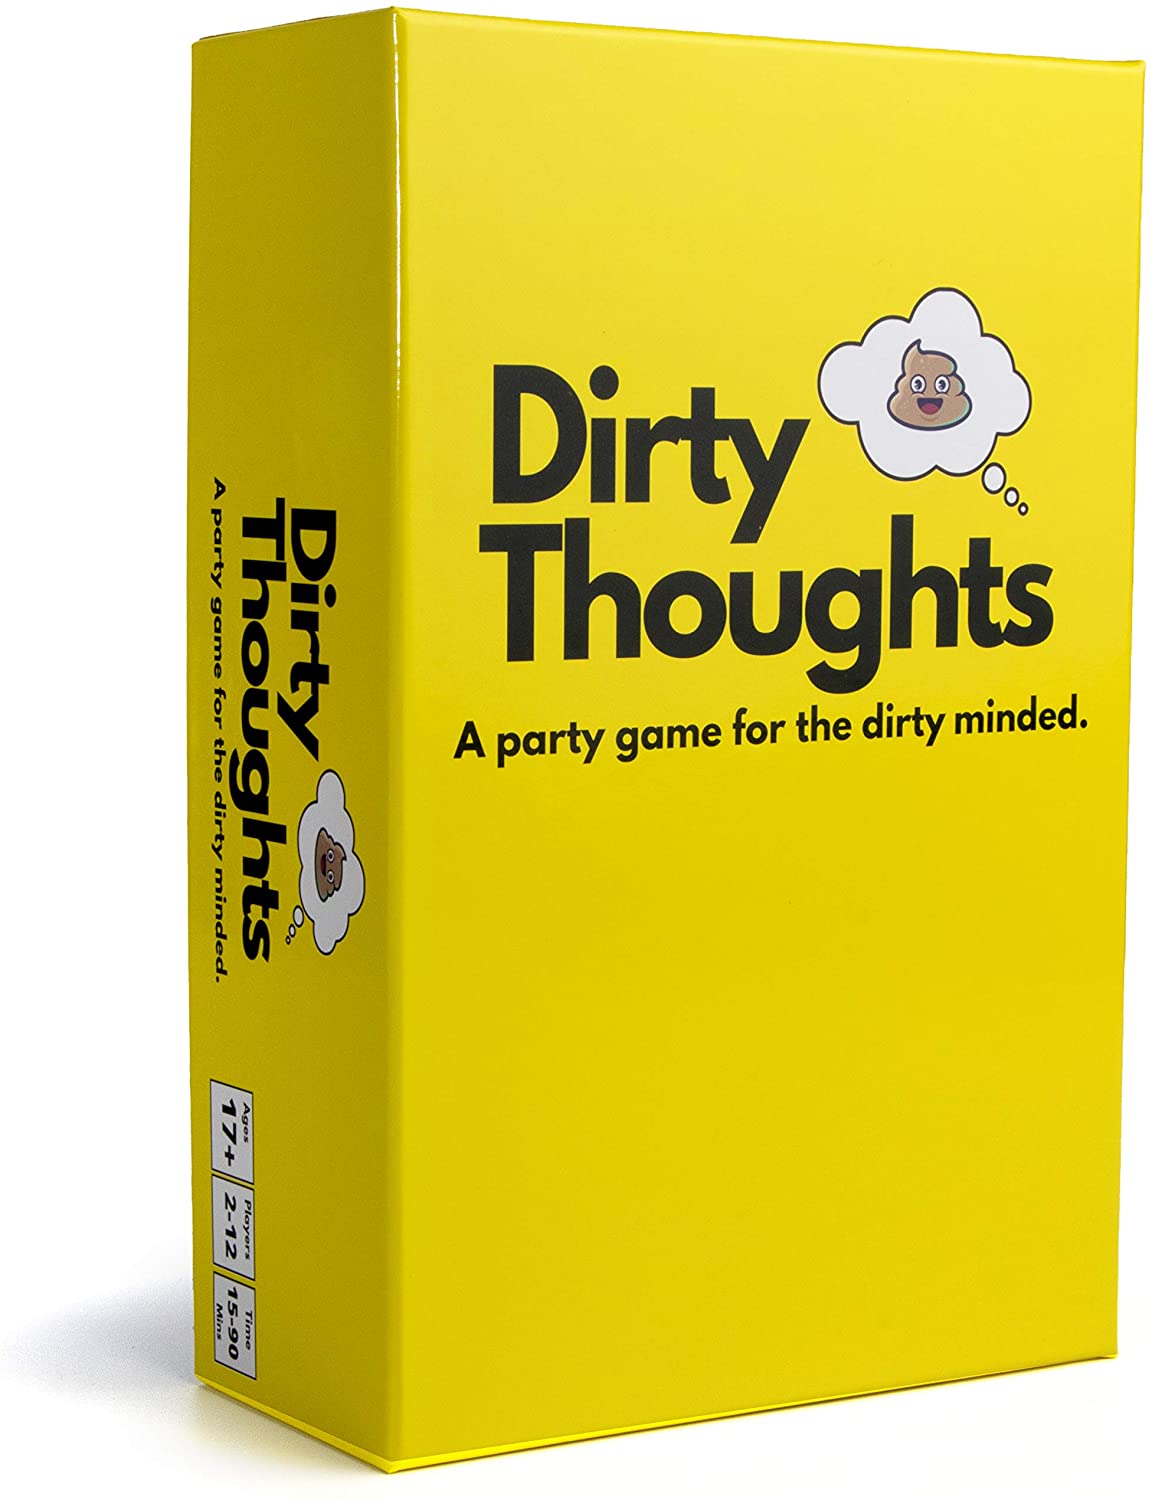 Dirty Thoughts Family Games for Teens and Adults - Top Adult Party Games - New Adult Board Games